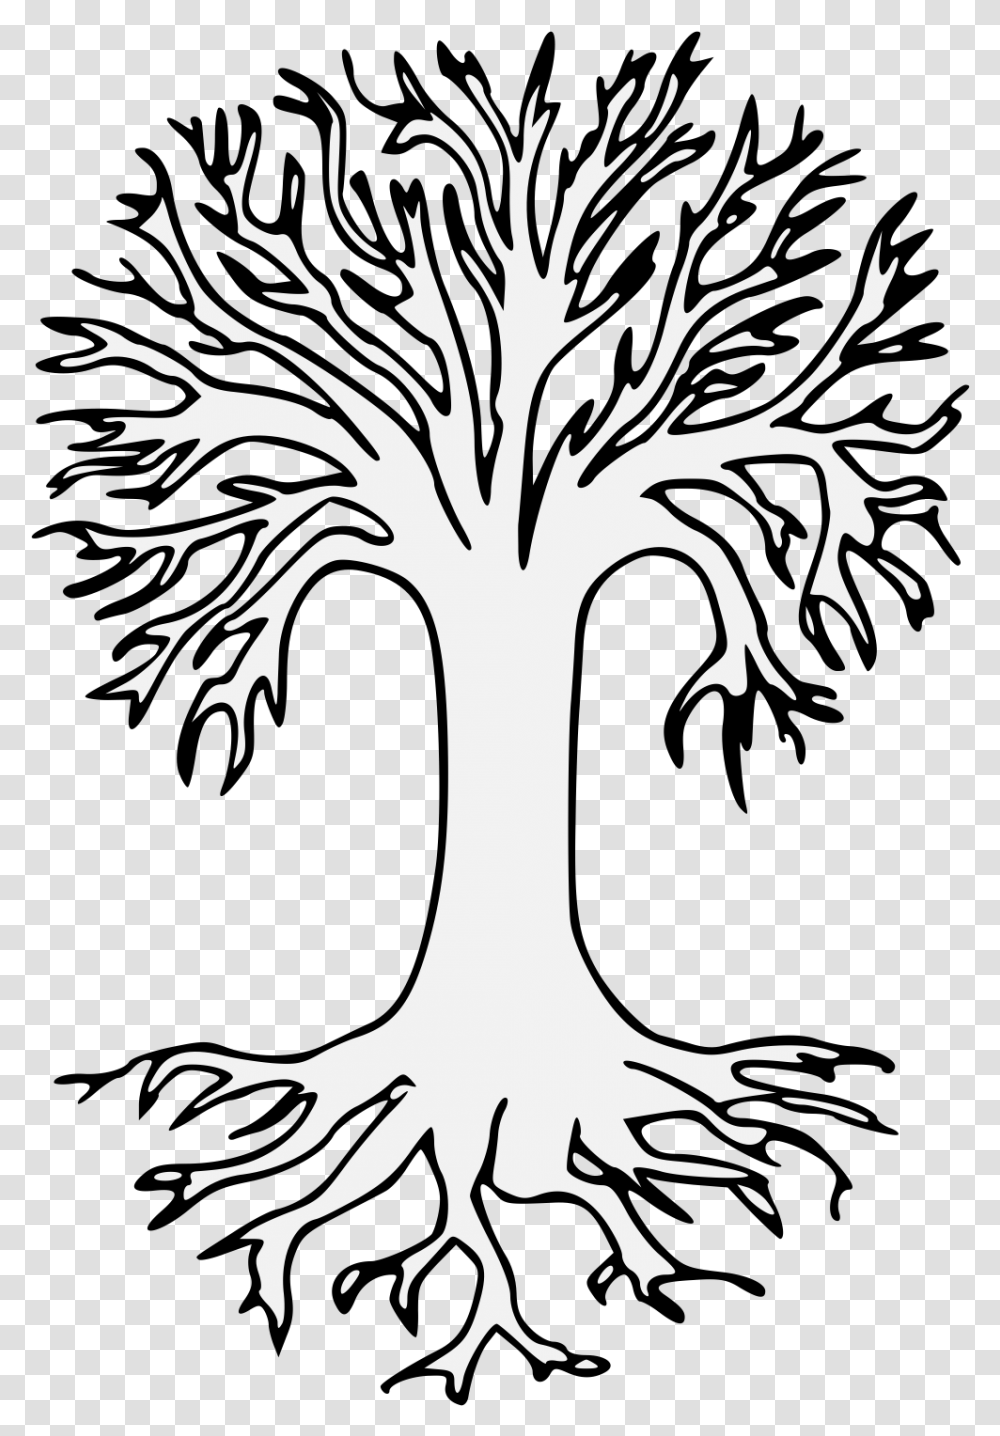 Download Hd Details Bare Tree Drawing With Roots Bare Tree With Roots, Plant, Stencil, Palm Tree Transparent Png